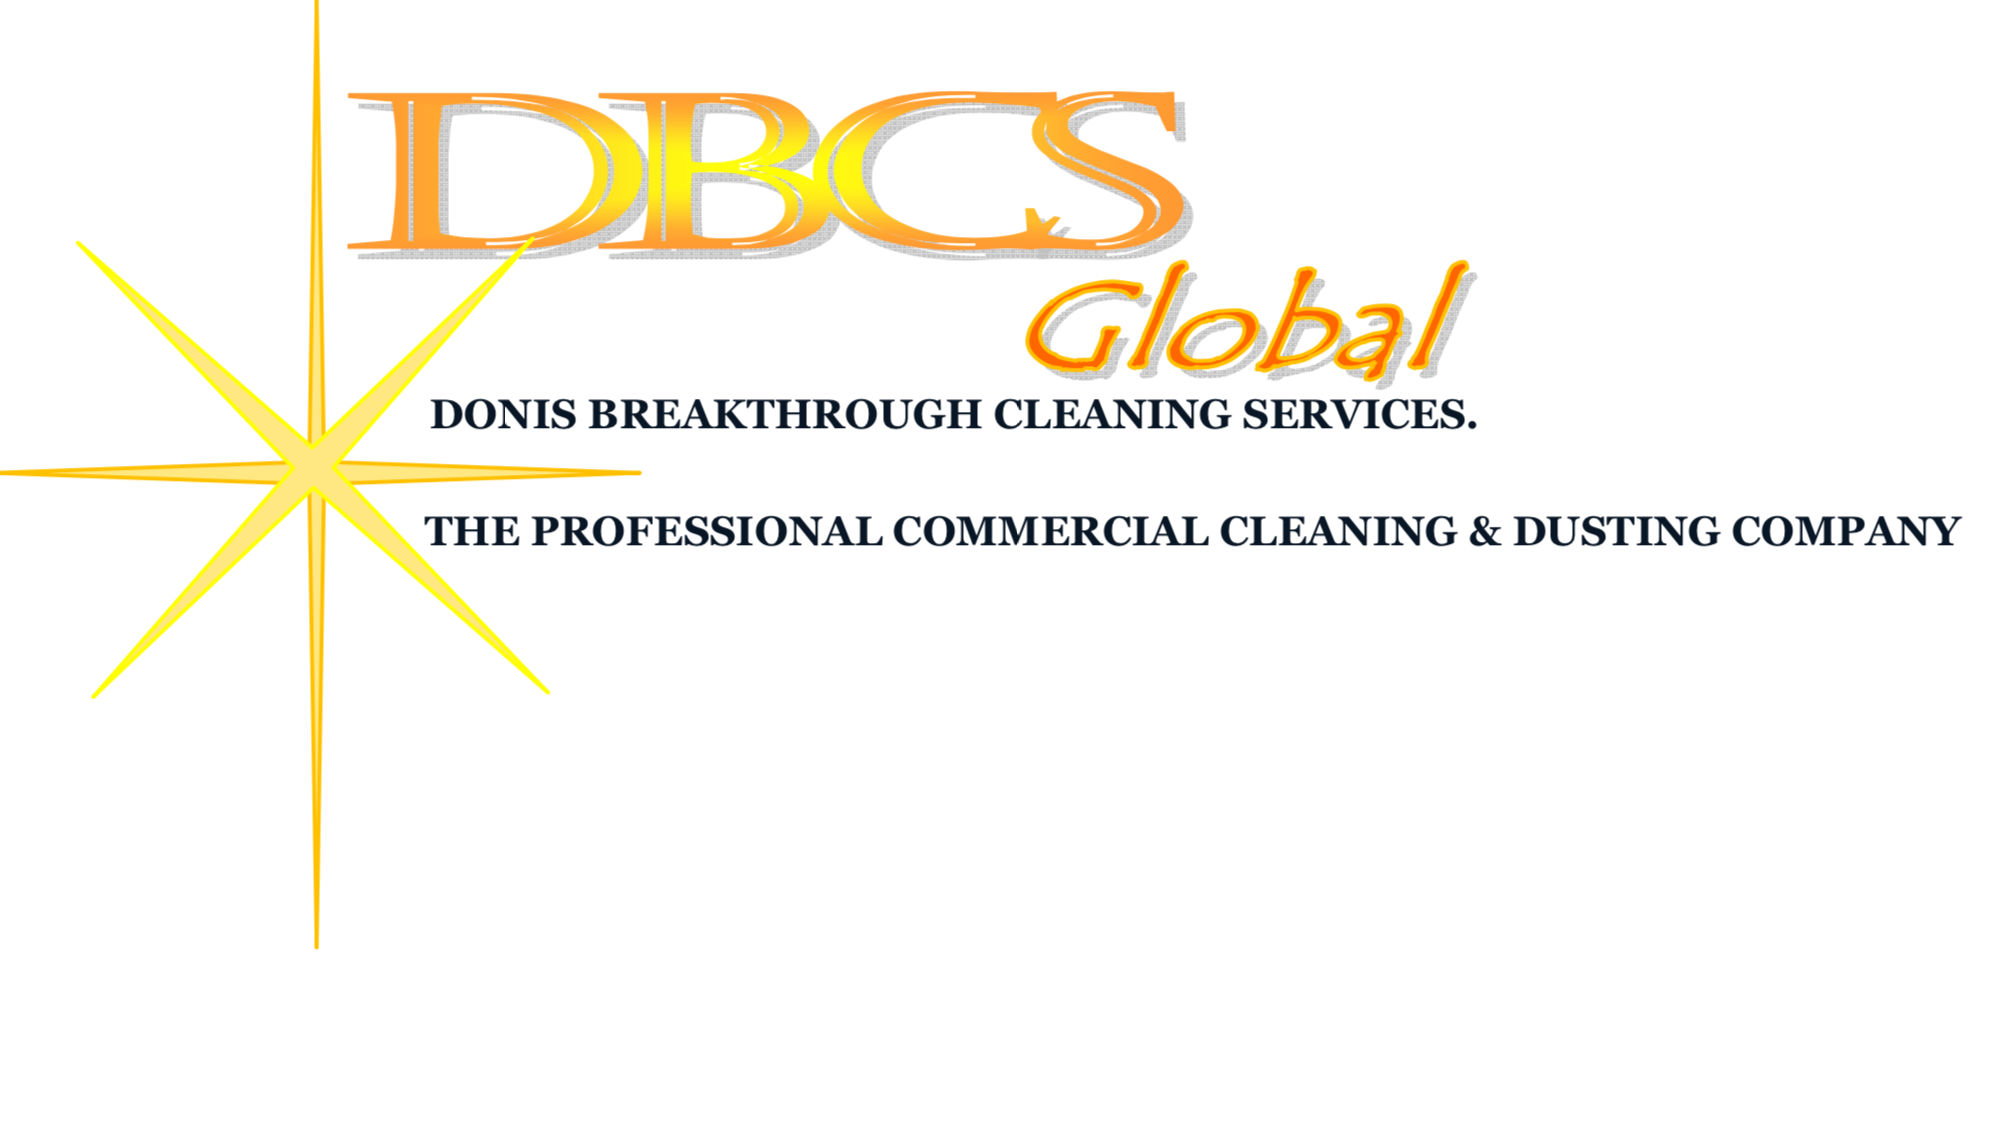 Donis Breakthru Cleaning Services (DBCS) Logo